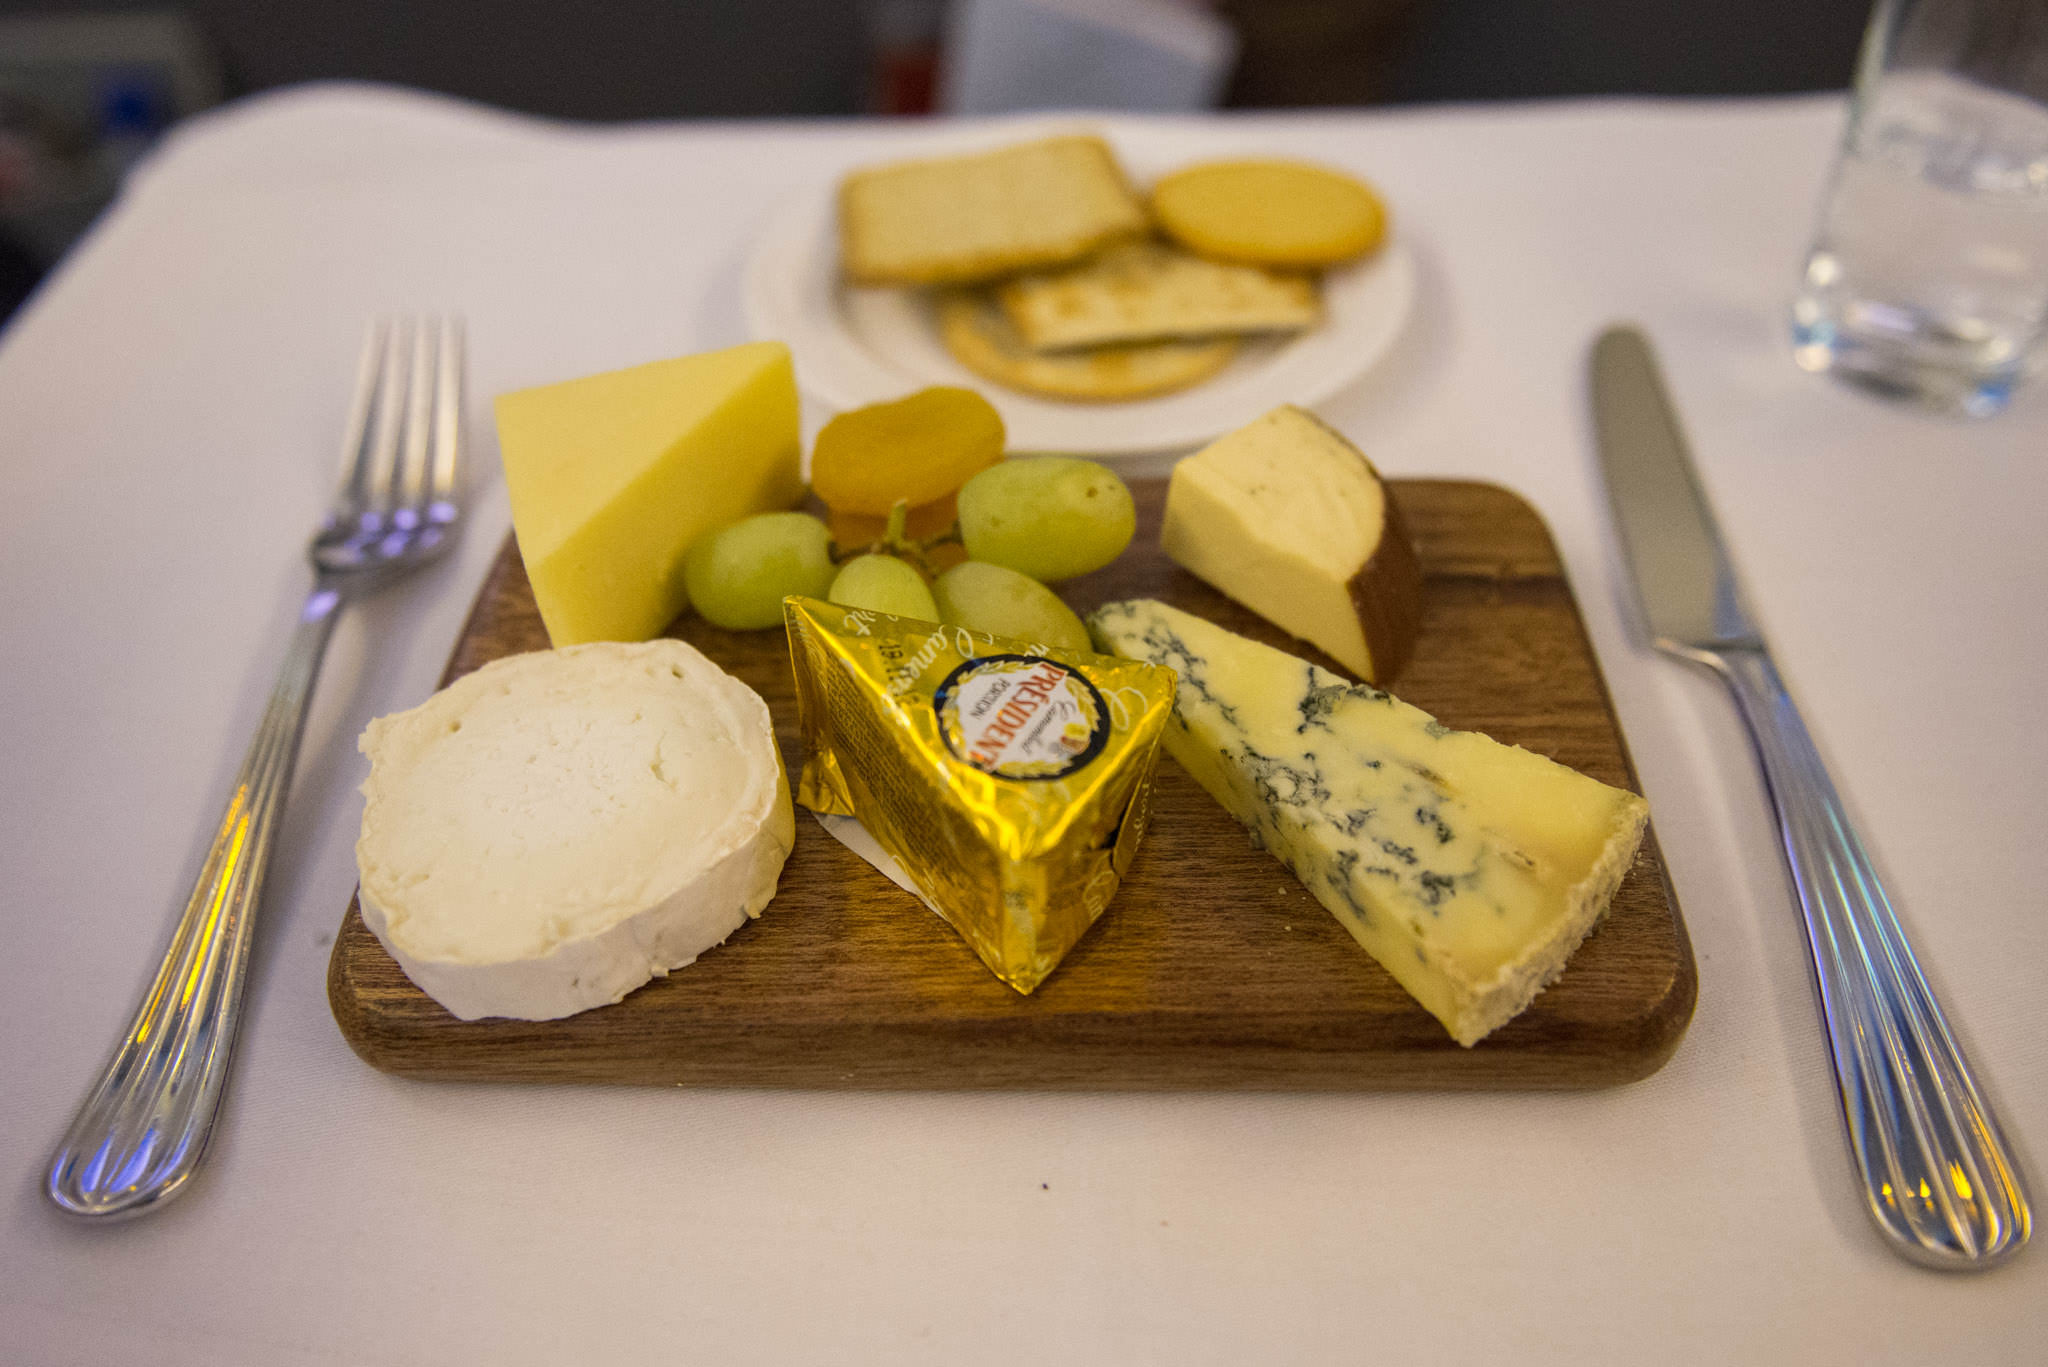 A generous cheeseboard for one